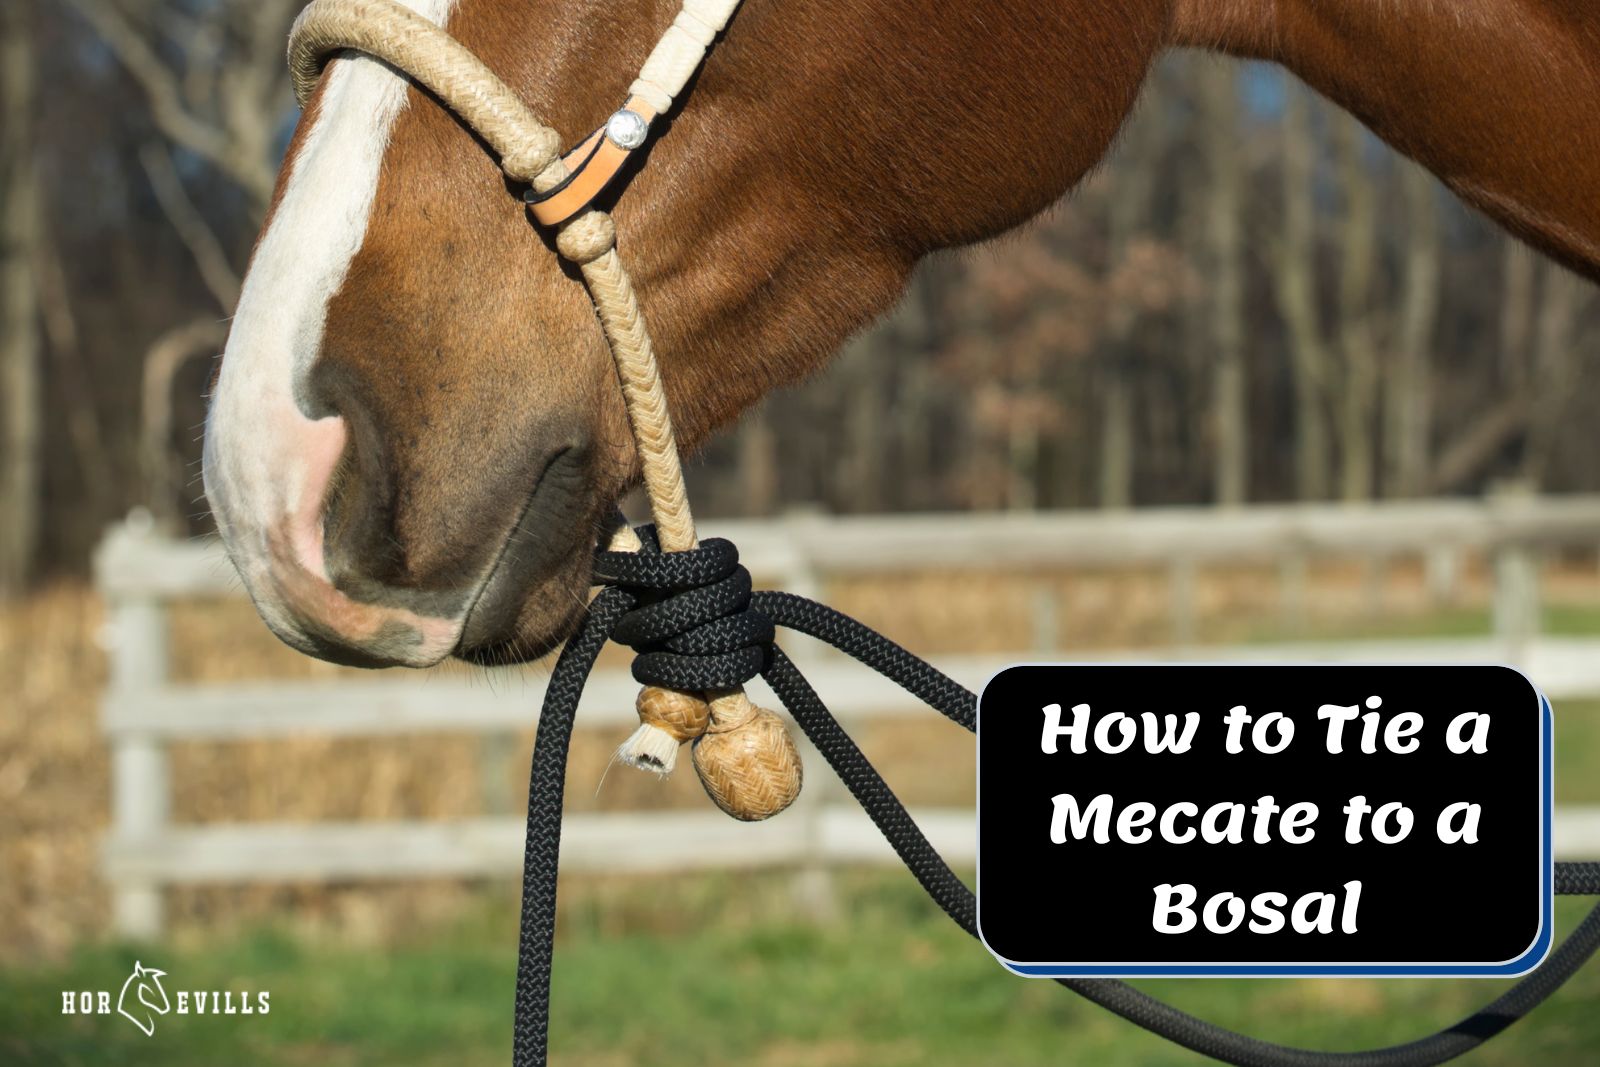 horse with a bosal beside "How to Tie a Mecate to a Bosal" text